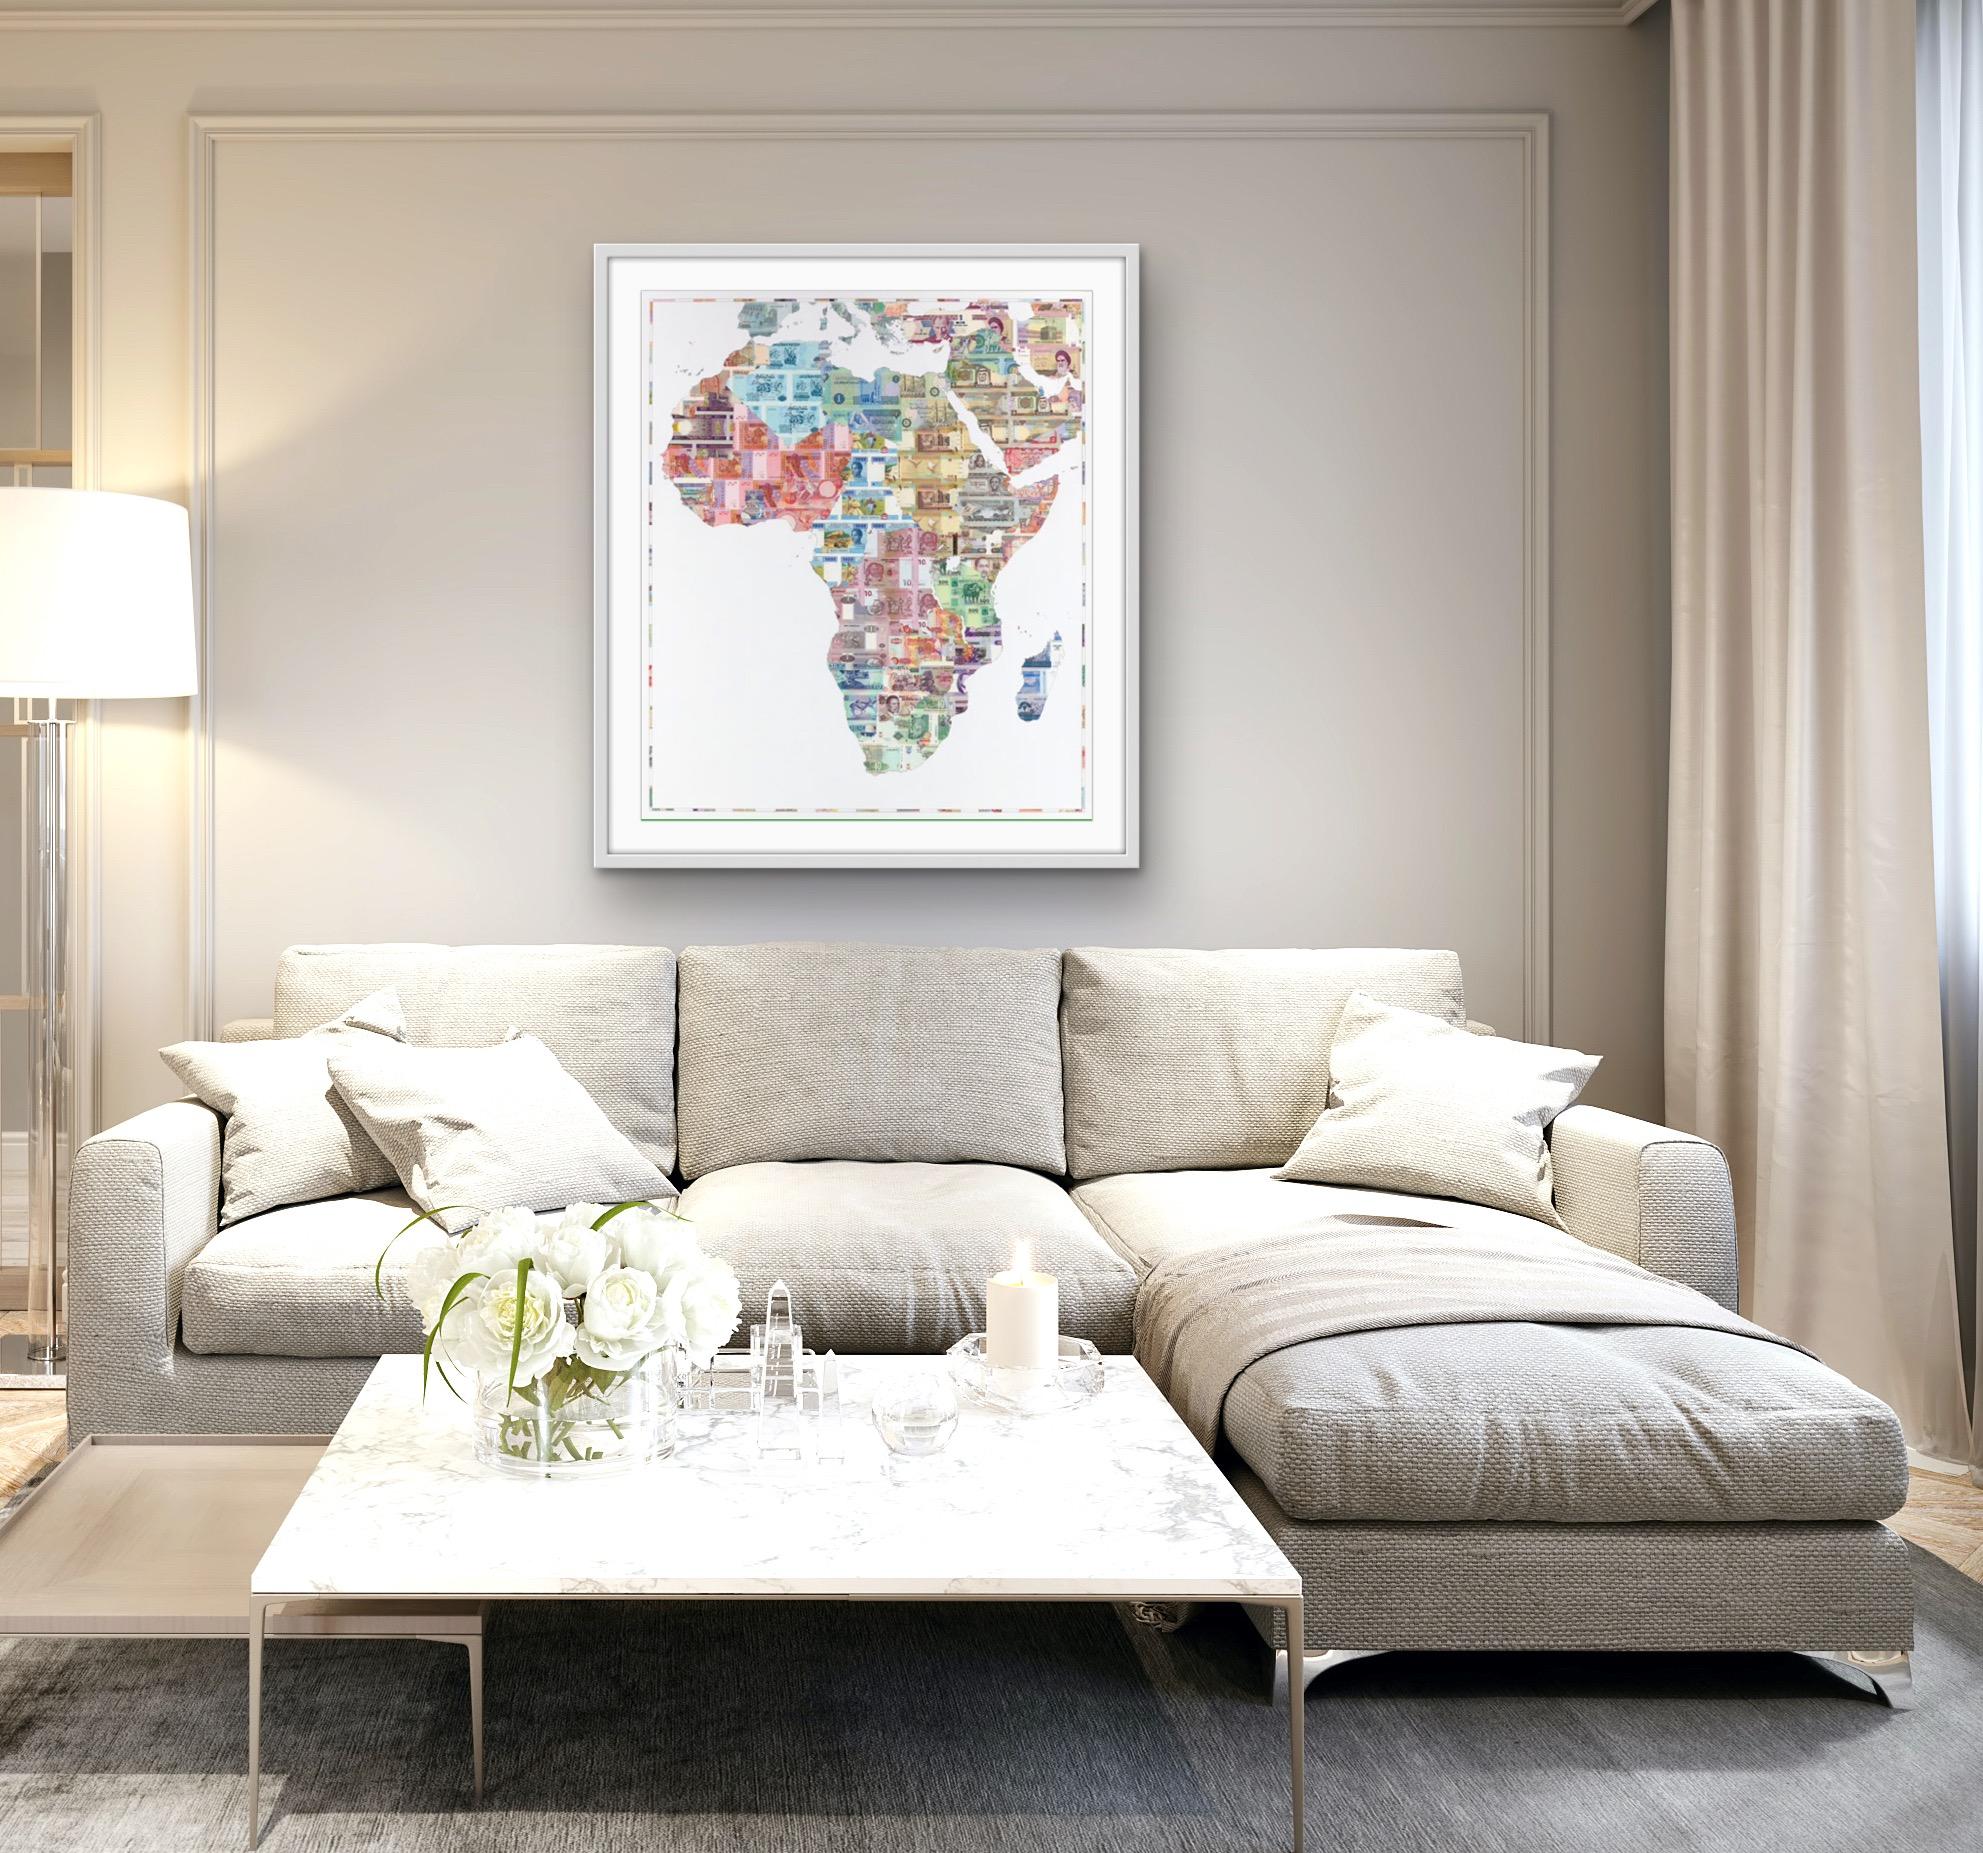 Money Map of Africa, limited edition artwork, affordable art - Print by Justine Smith